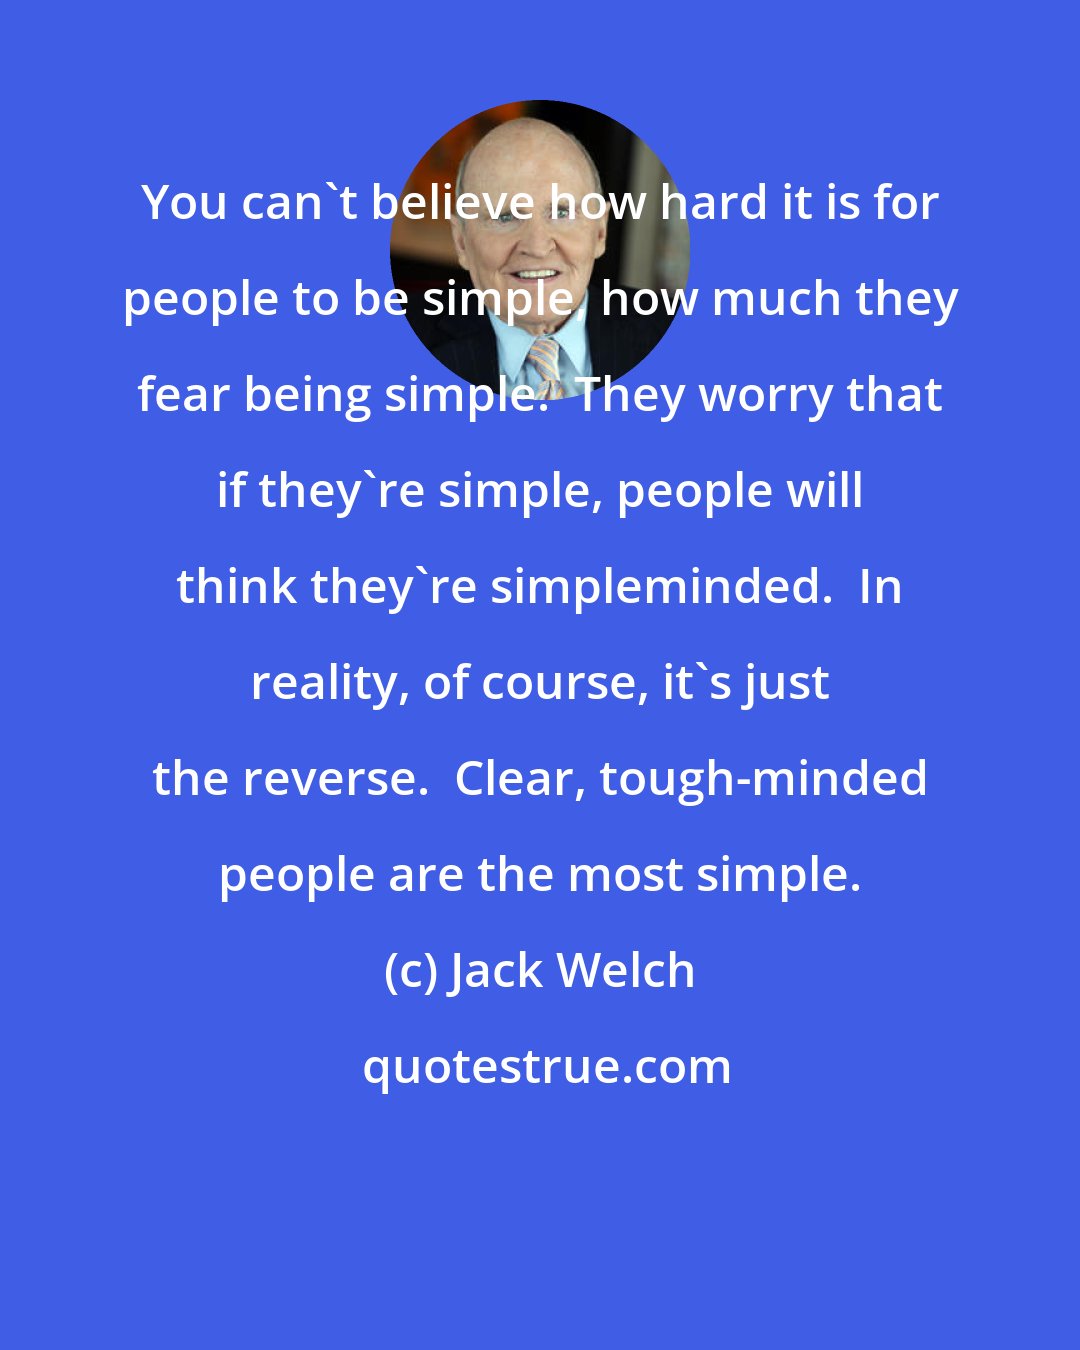 Jack Welch: You can't believe how hard it is for people to be simple, how much they fear being simple.  They worry that if they're simple, people will think they're simpleminded.  In reality, of course, it's just the reverse.  Clear, tough-minded people are the most simple.